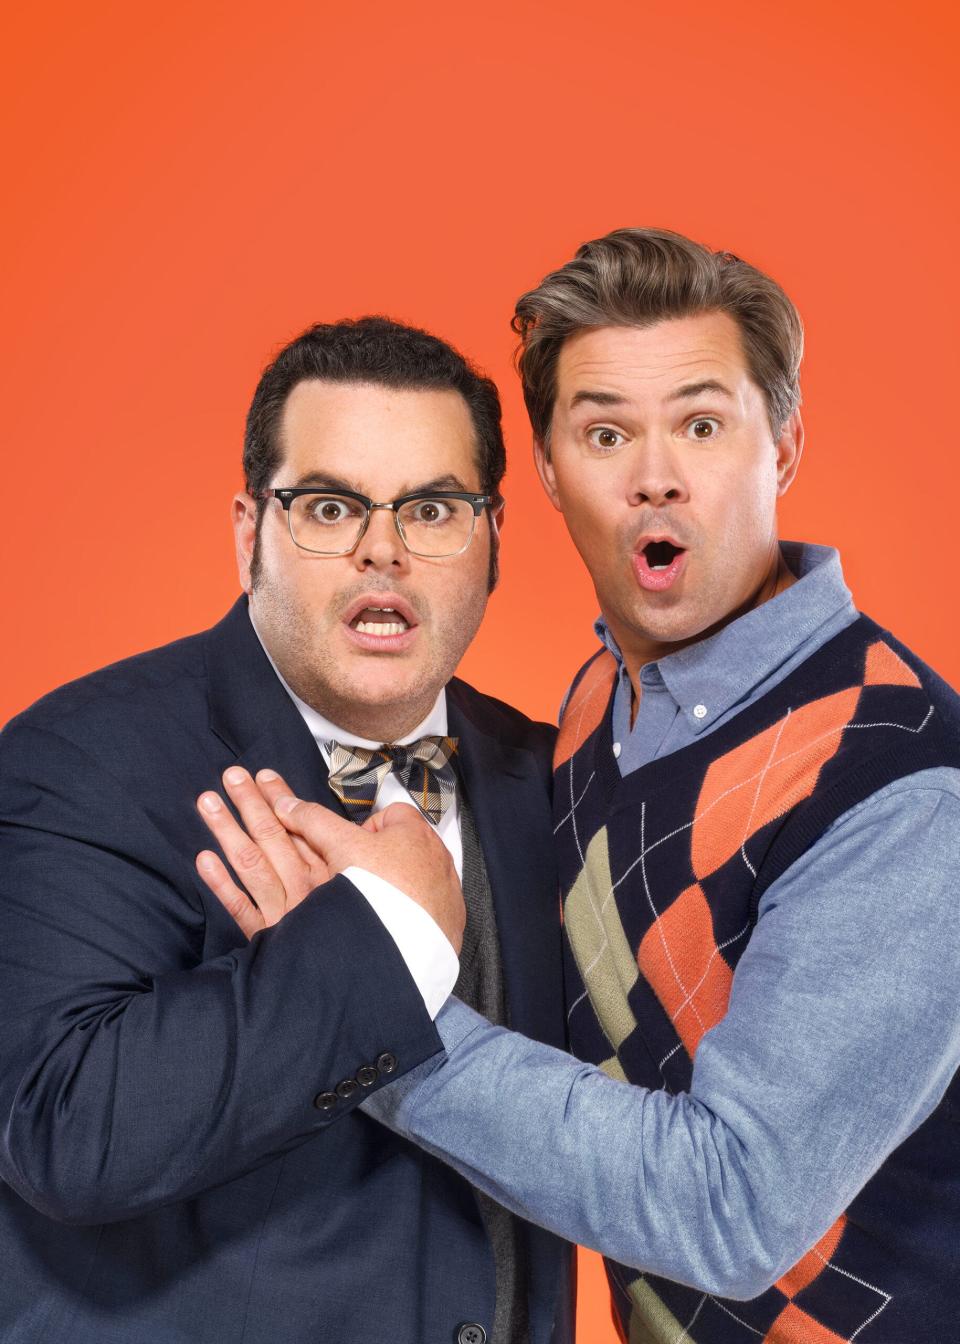 Josh Gad (left) and Andrew Rannells star in "Gutenberg! The Musical!"